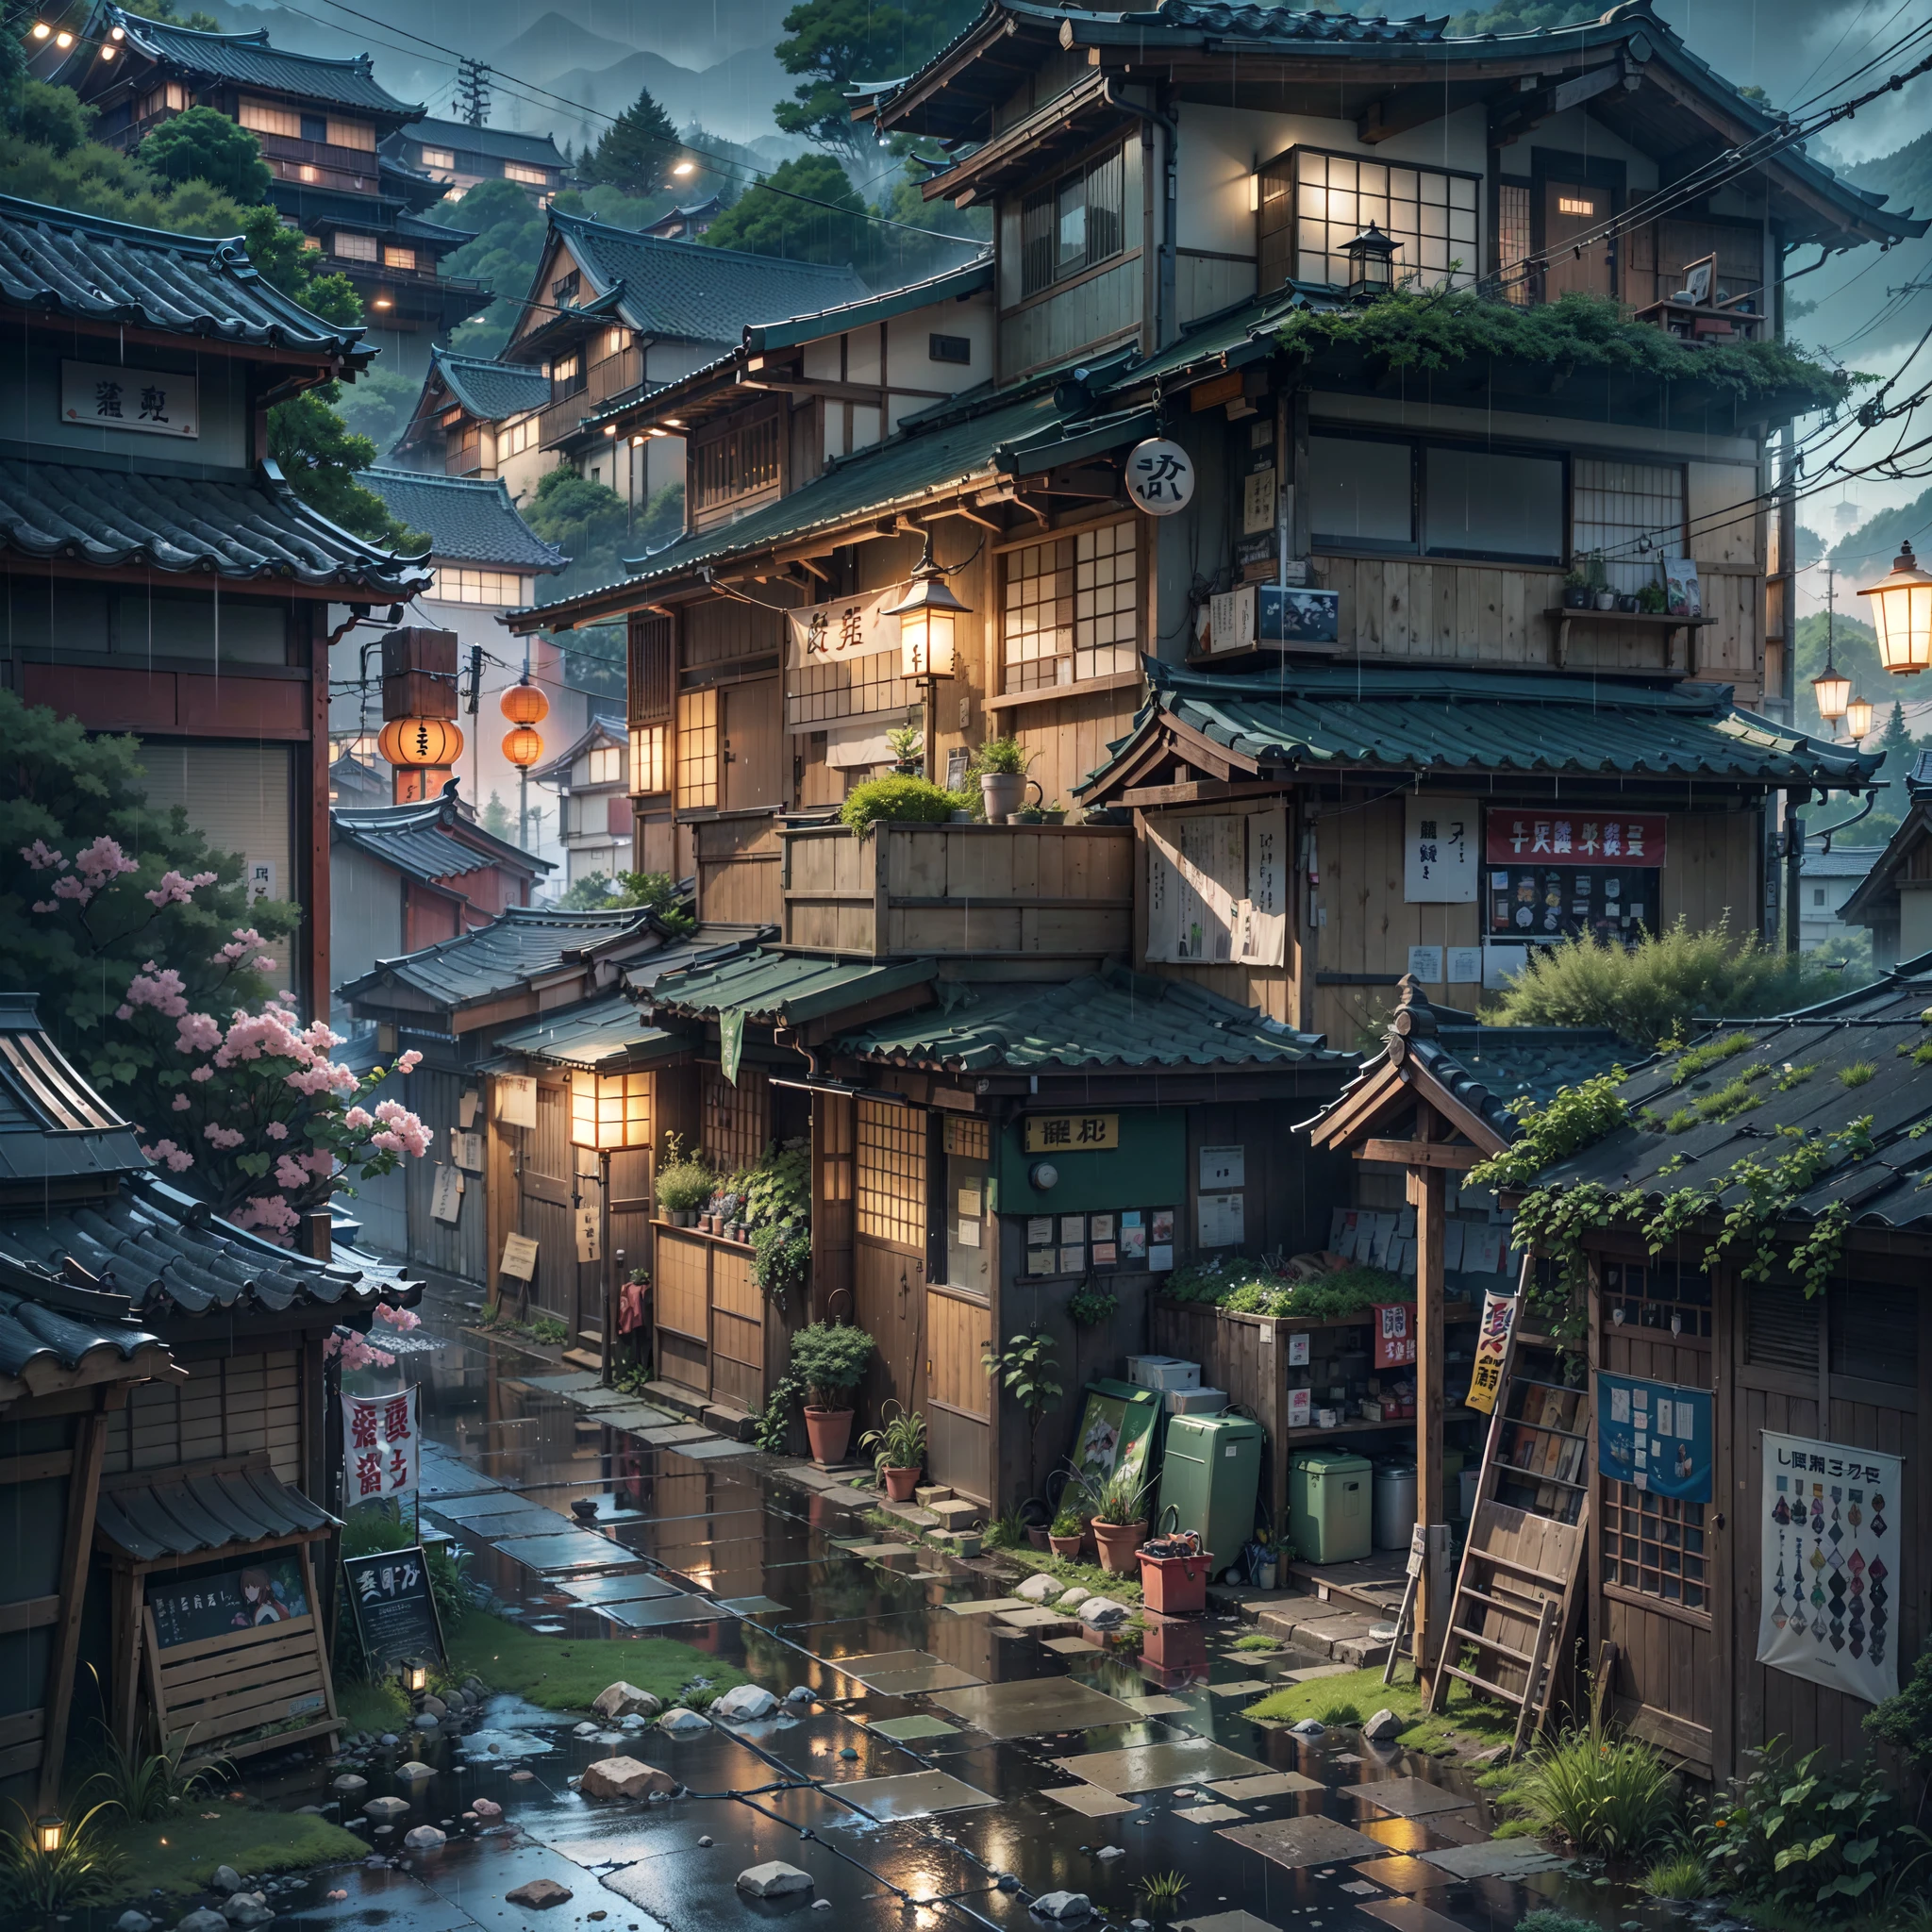 anime, anime style, anime vibe, japan, anime wallpaper, anime background, japanese village, anime background art, japanese town, scenery artwork, anime countryside landscape, beautiful anime scenery, anime scenery, japanese street, anime scenery concept art, beautiful anime scene, detailed scenery, , scenery art detailed, no one in sight, (no one: 1), japanese shop banners, rocks scattered, air vents, gutters, telephone wires, wires, cables, air ventilation systems, lanterns, rain, raining, heavy rain, dramatic weather, puddles on the floor, rain falling from the sky, rain drops, best quality, masterpiece, overgrown grass, mountains, narrow path, compact, wet